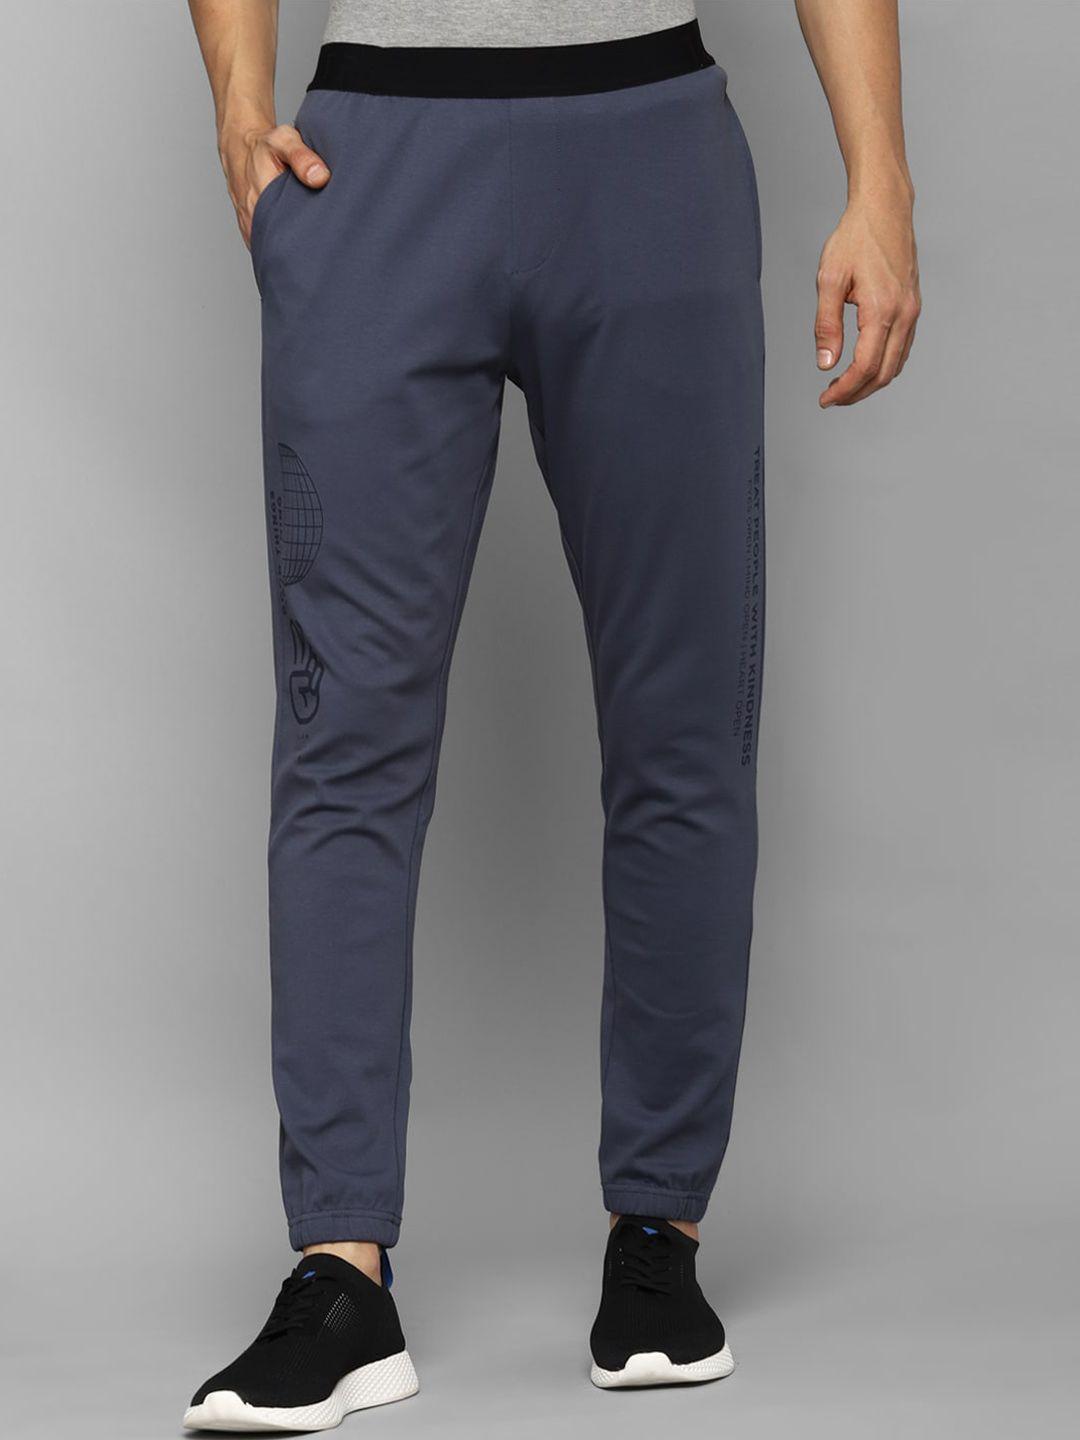 allen solly tribe men navy blue printed jogger track pant